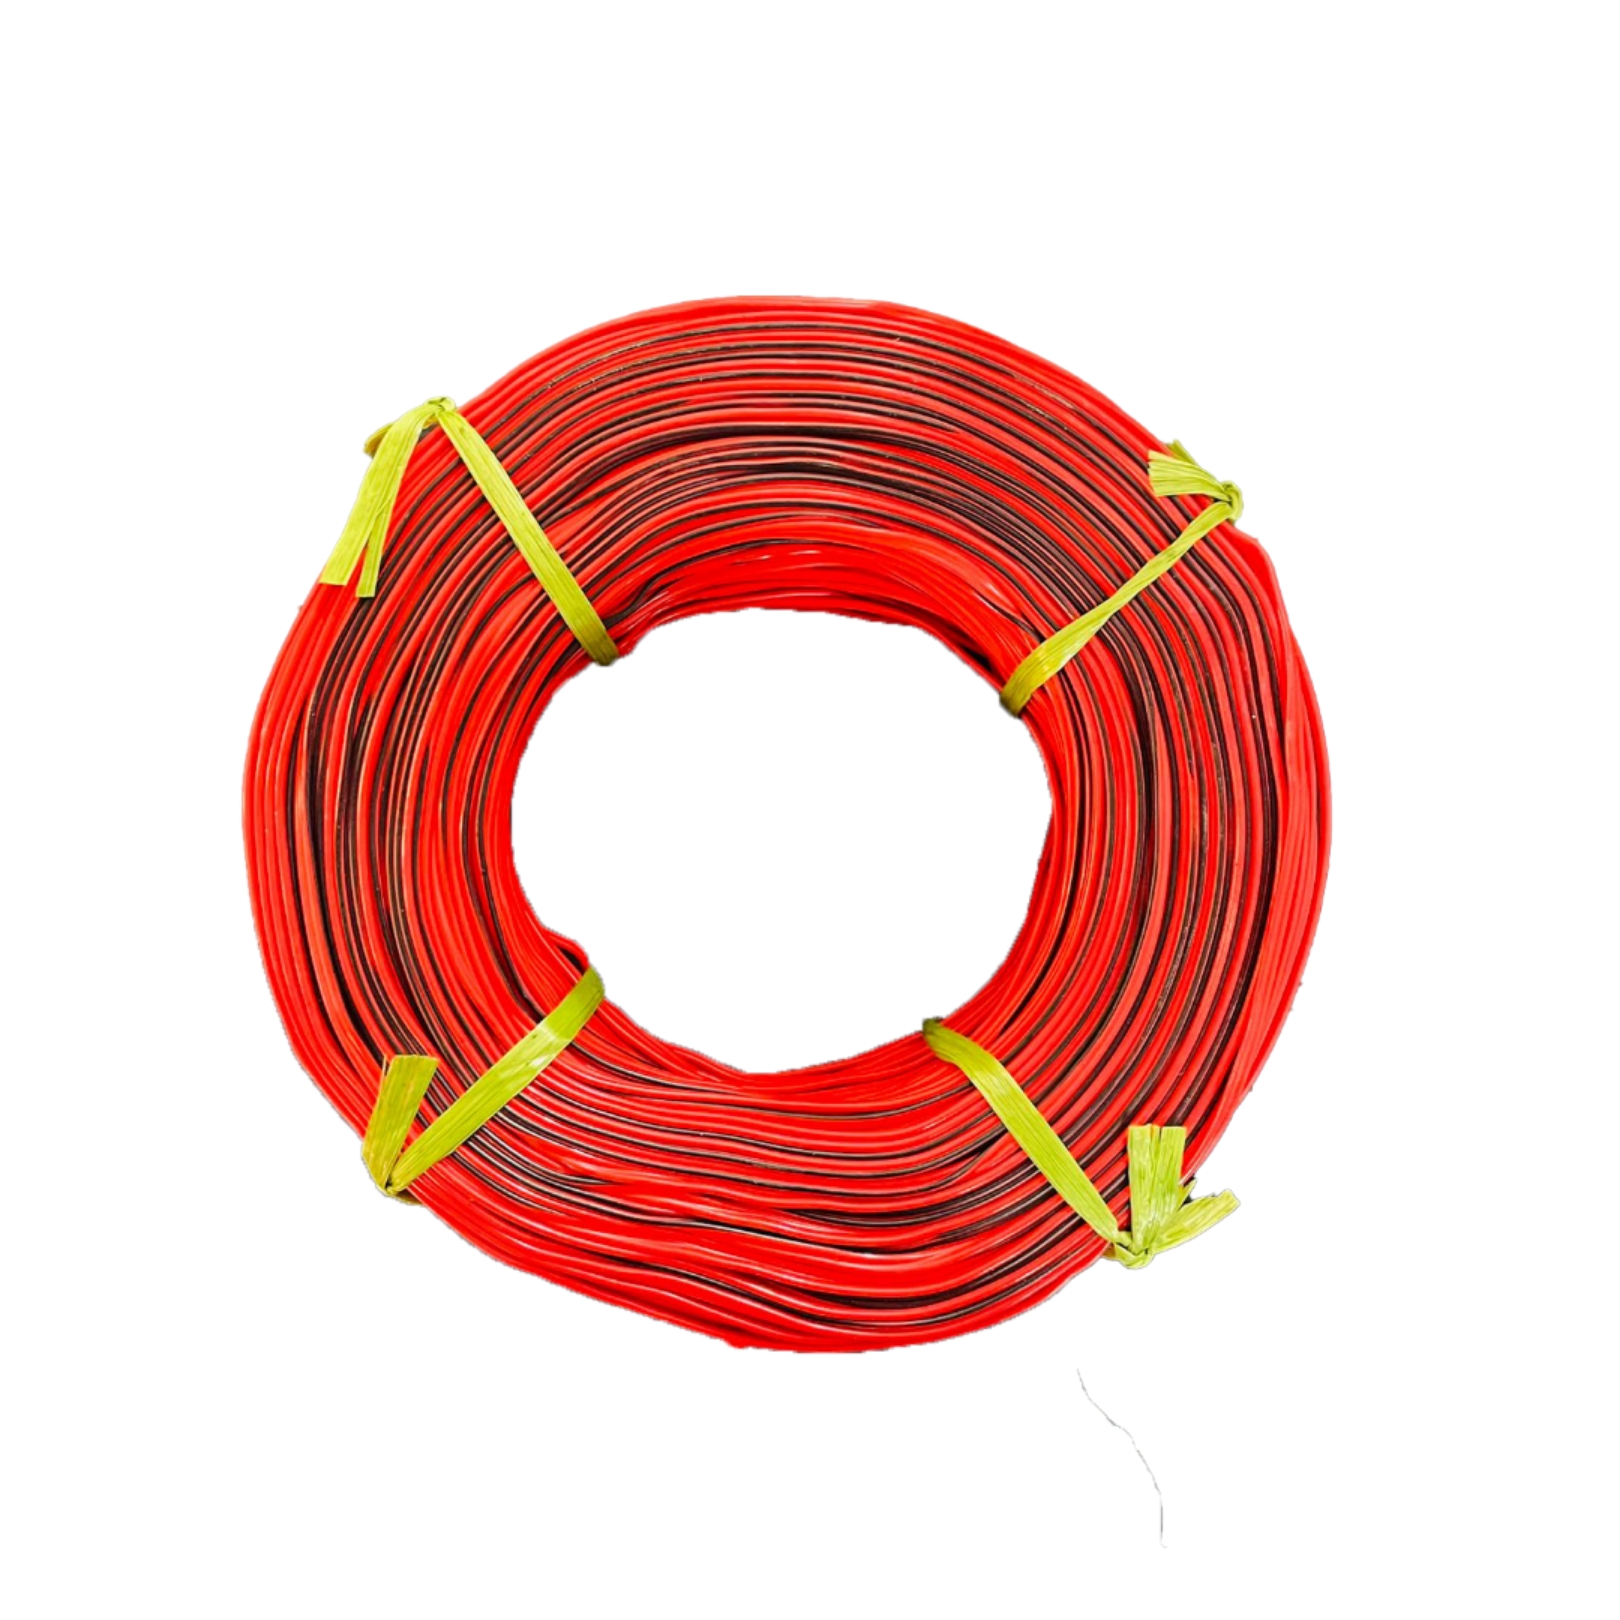 DC WIRE ROLL(RED & BLACK)